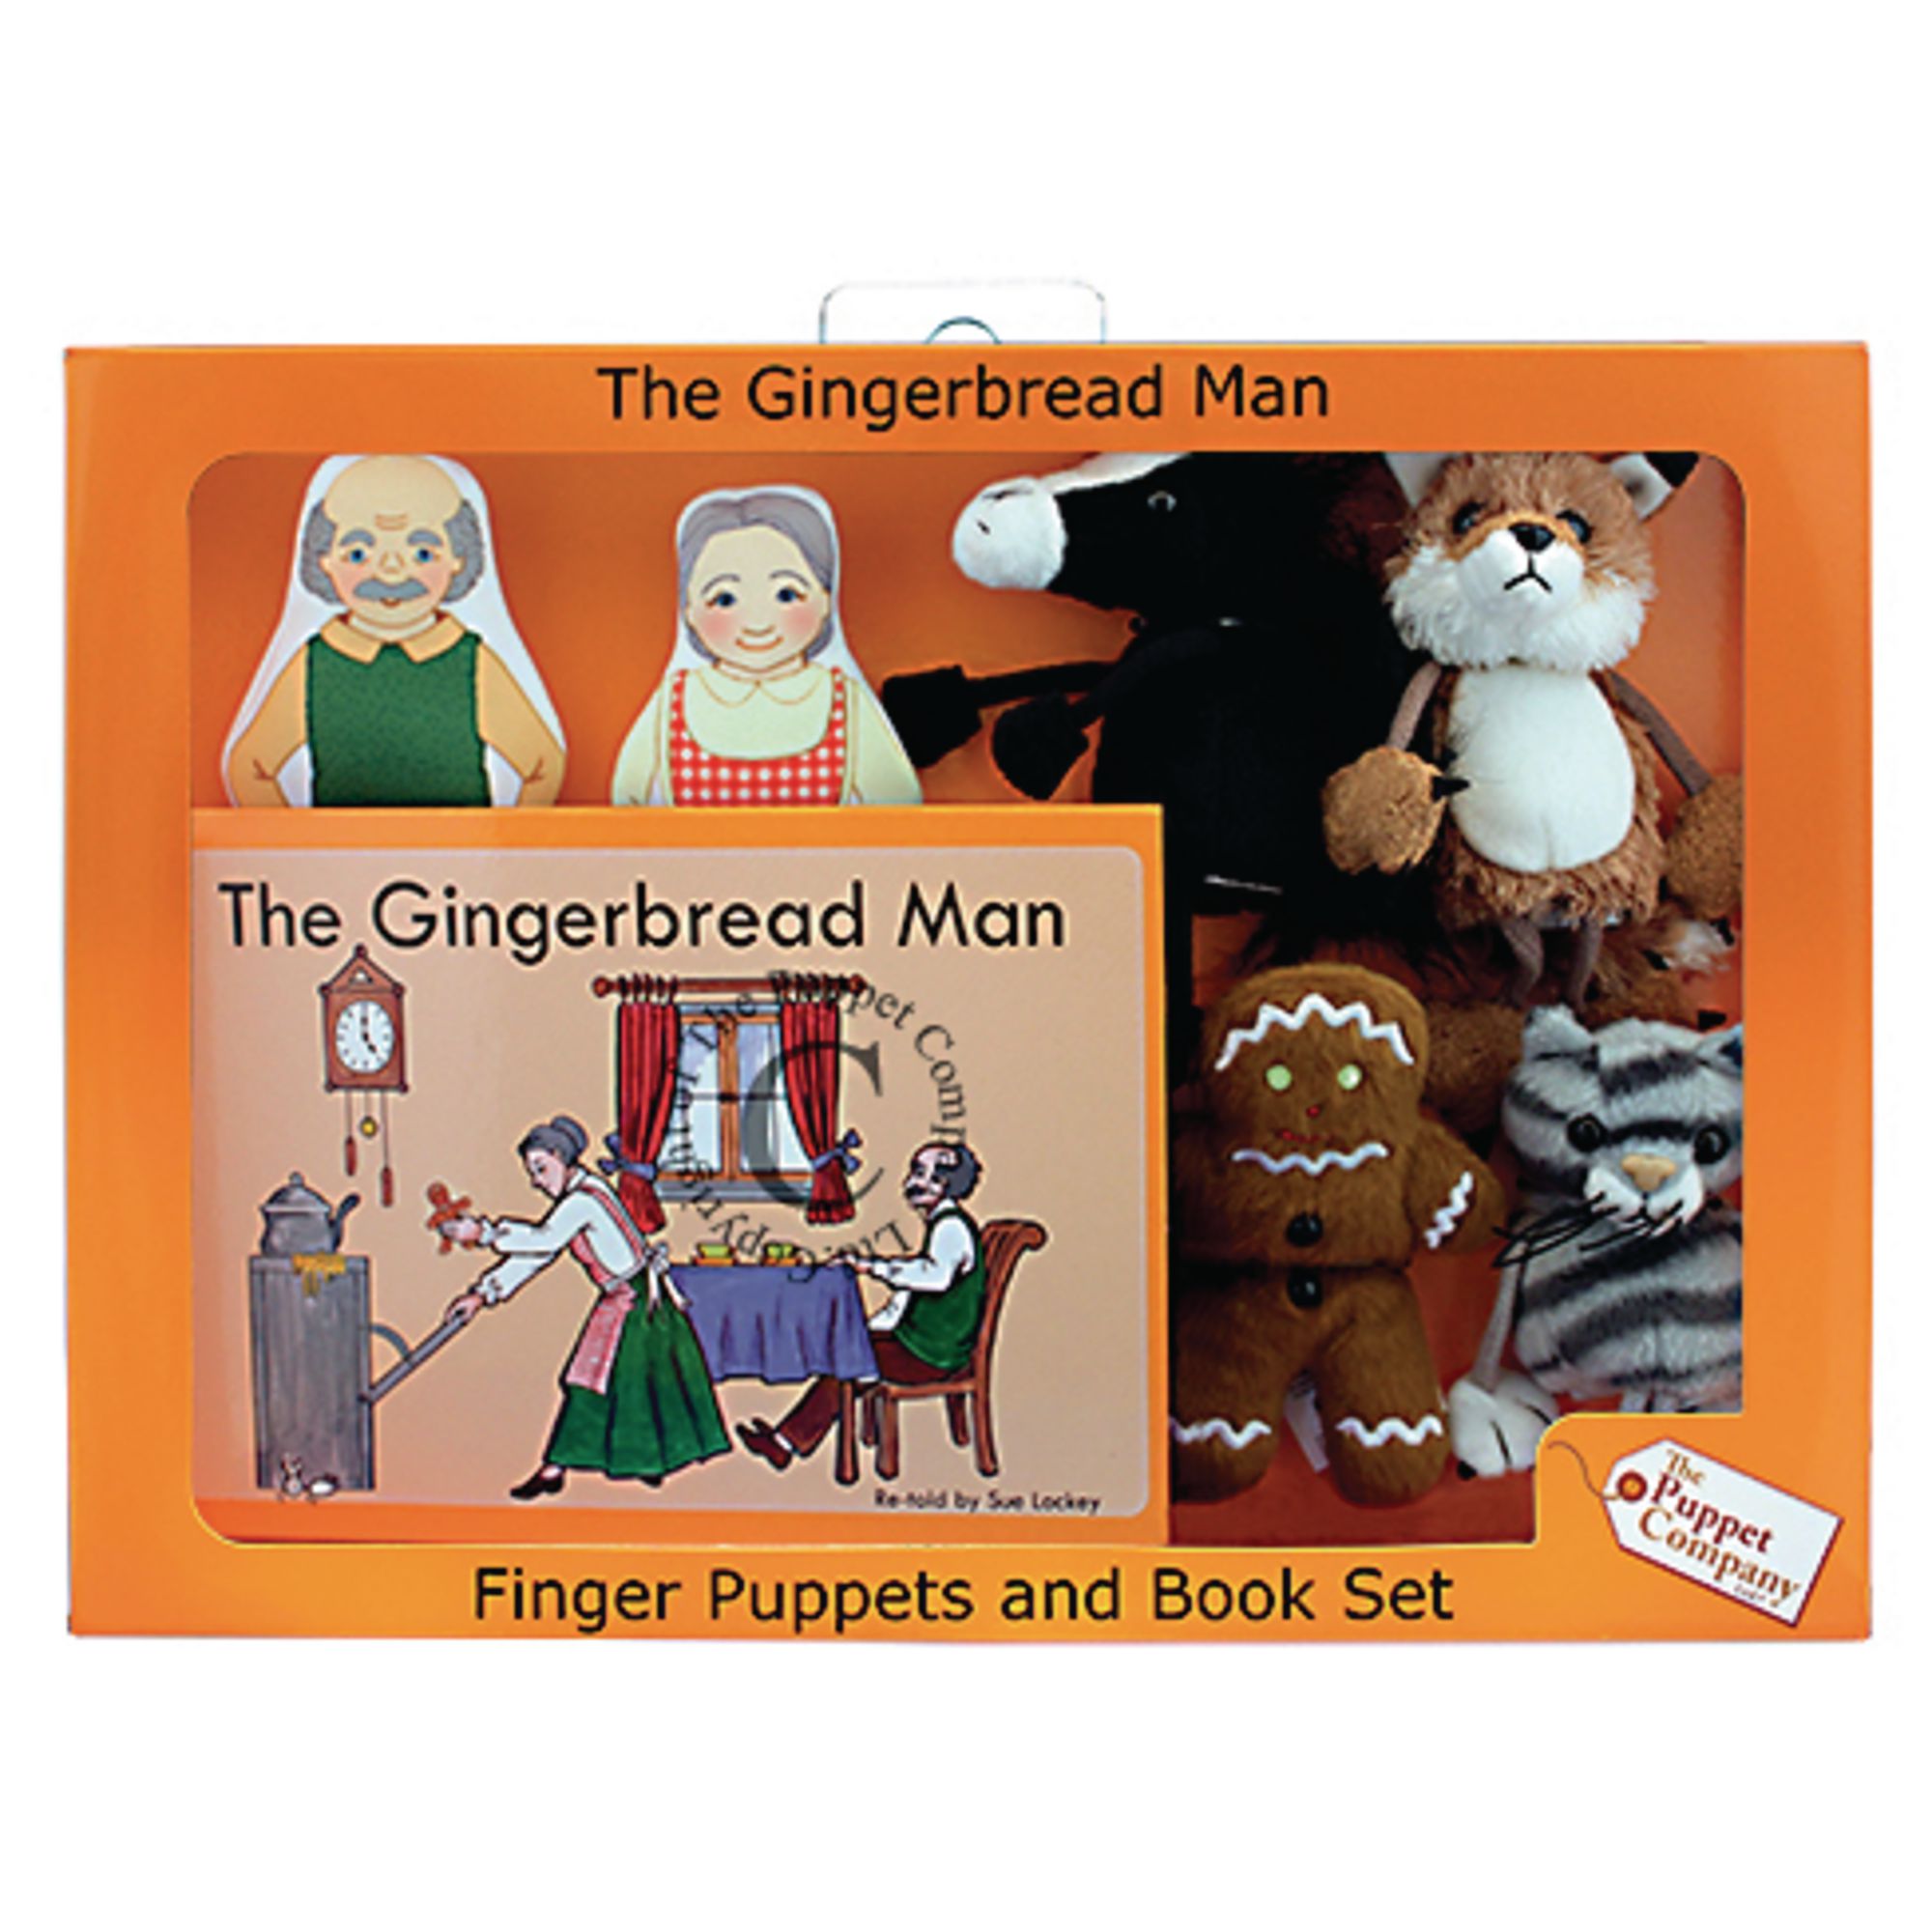 The Gingerbread Man Boxed Set